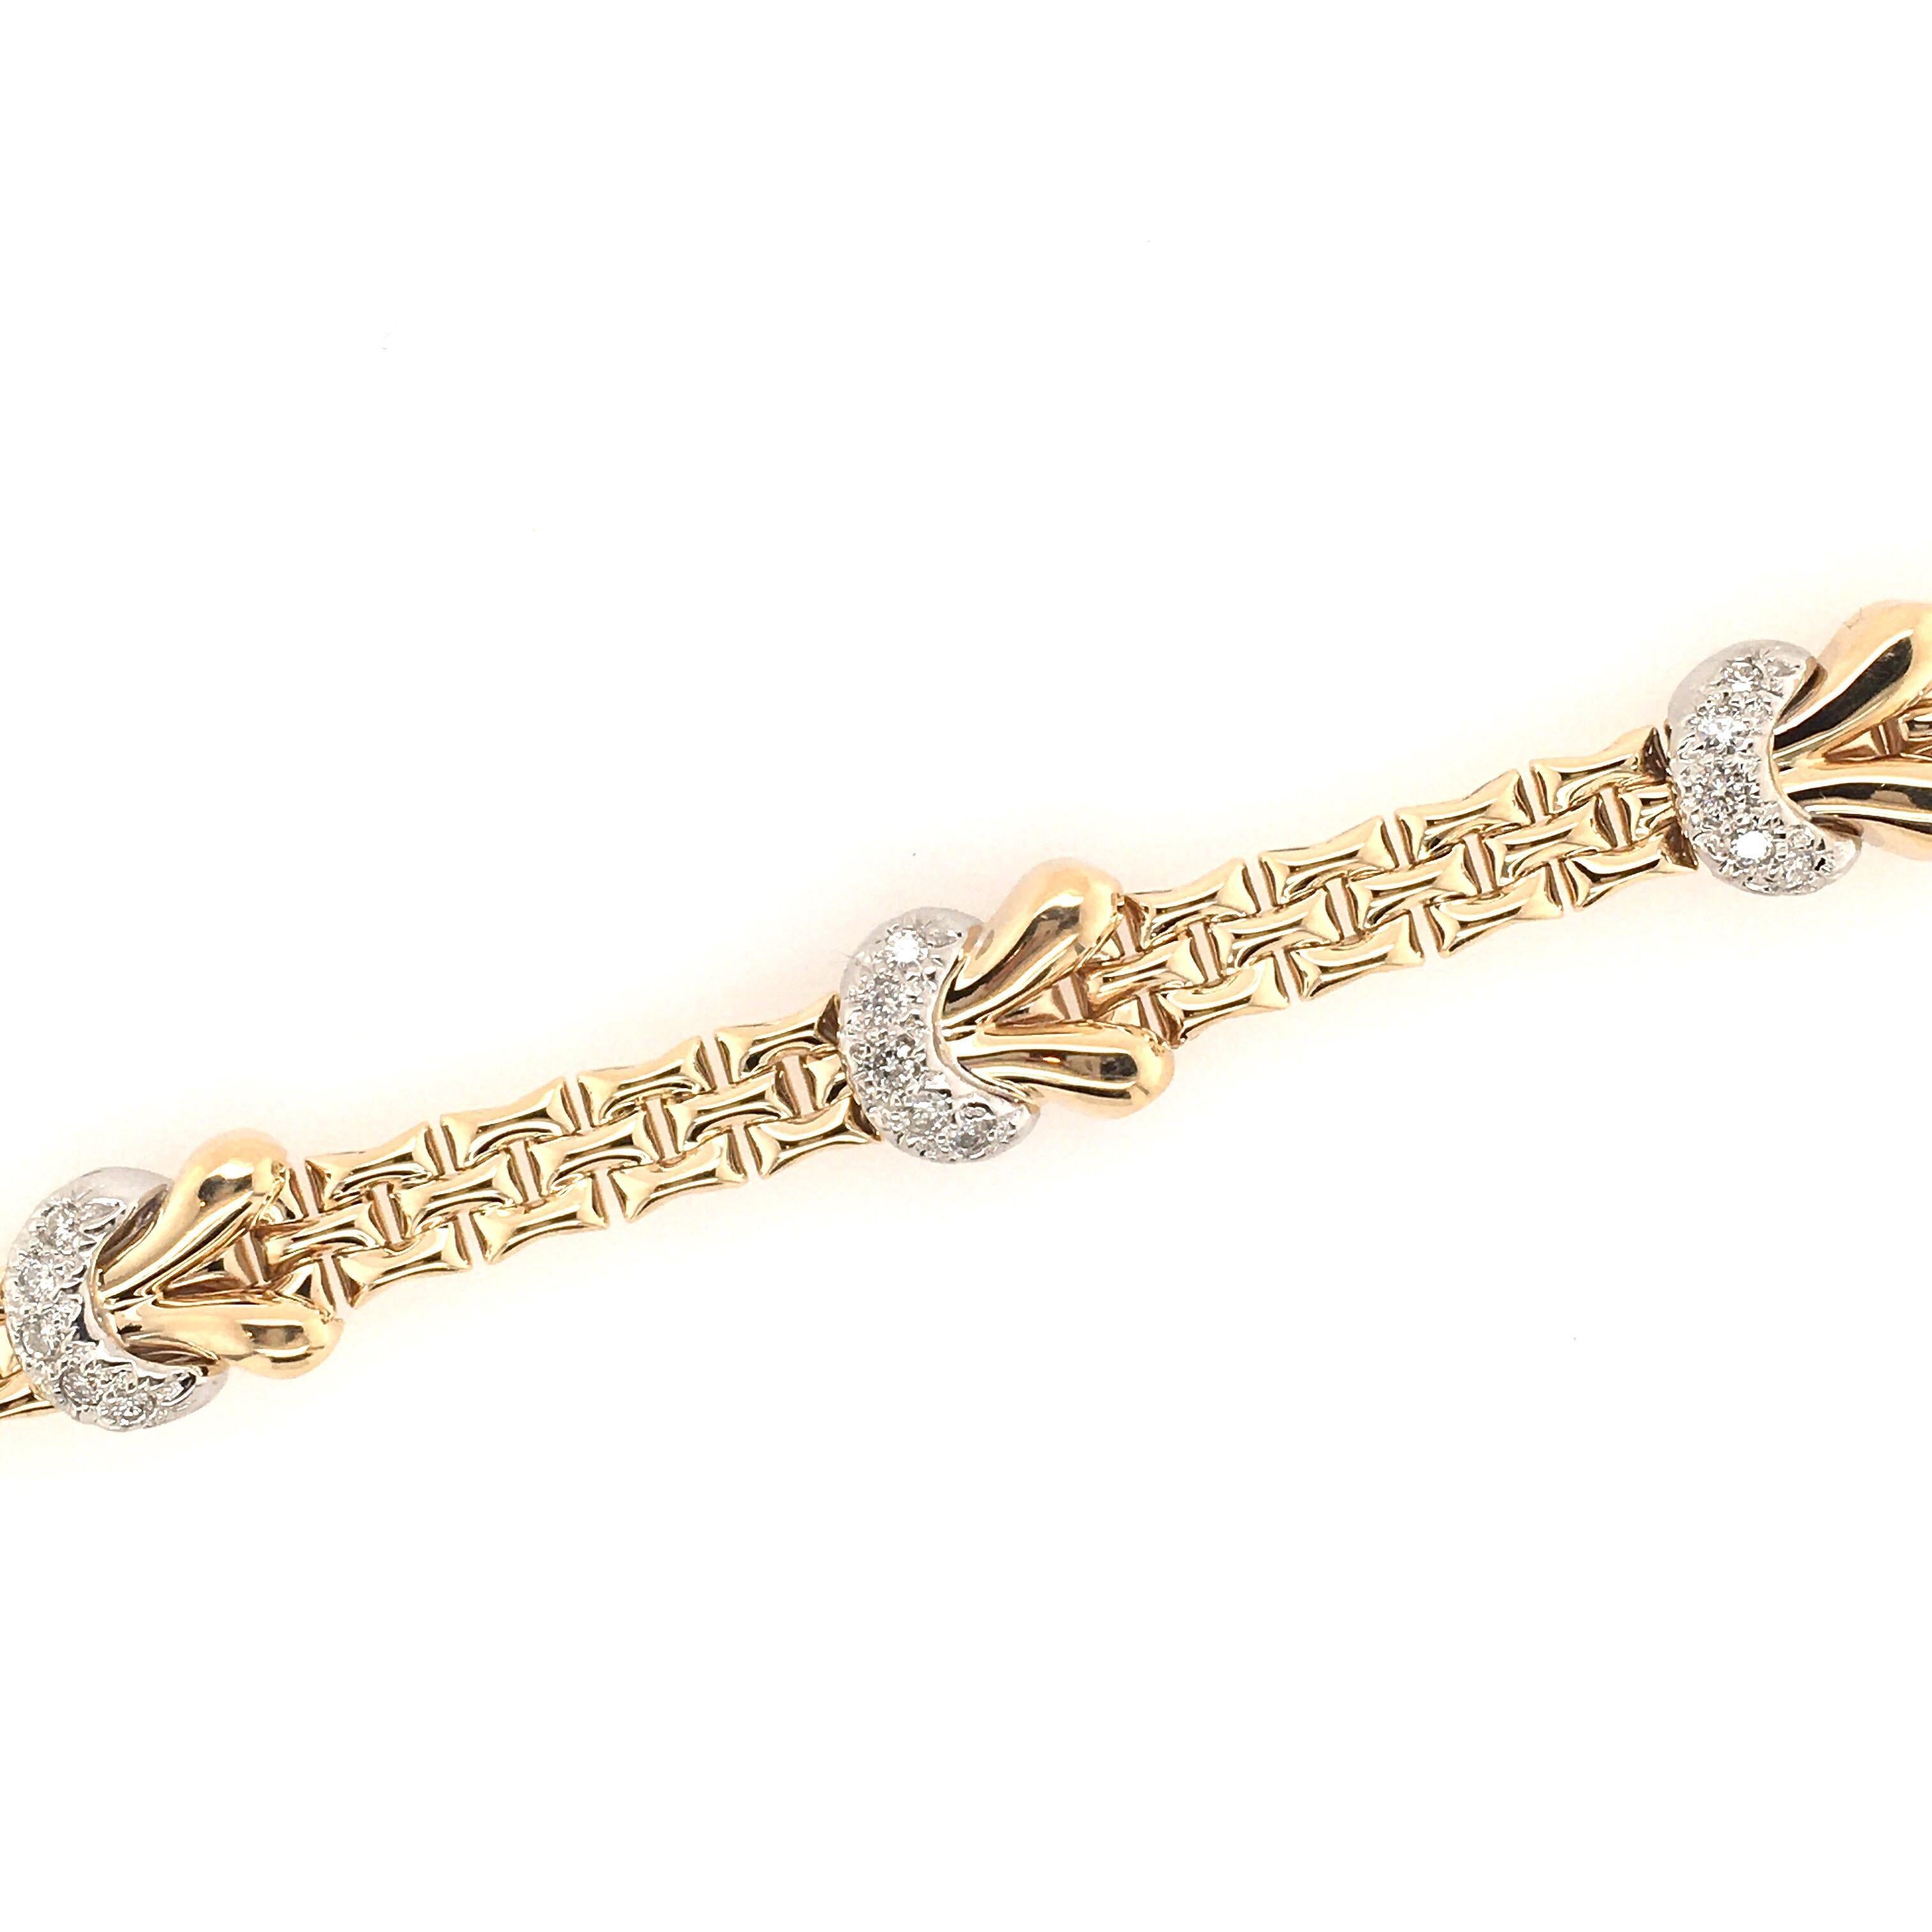 A 14 karat yellow gold and diamond bracelet.  Designed as polished fancy links, enhanced by four (4) pave set diamond half moon shaped links. Twenty (20) diamonds weigh approximately 0.80 carat. Length is approximately 7 inches, gross weight is